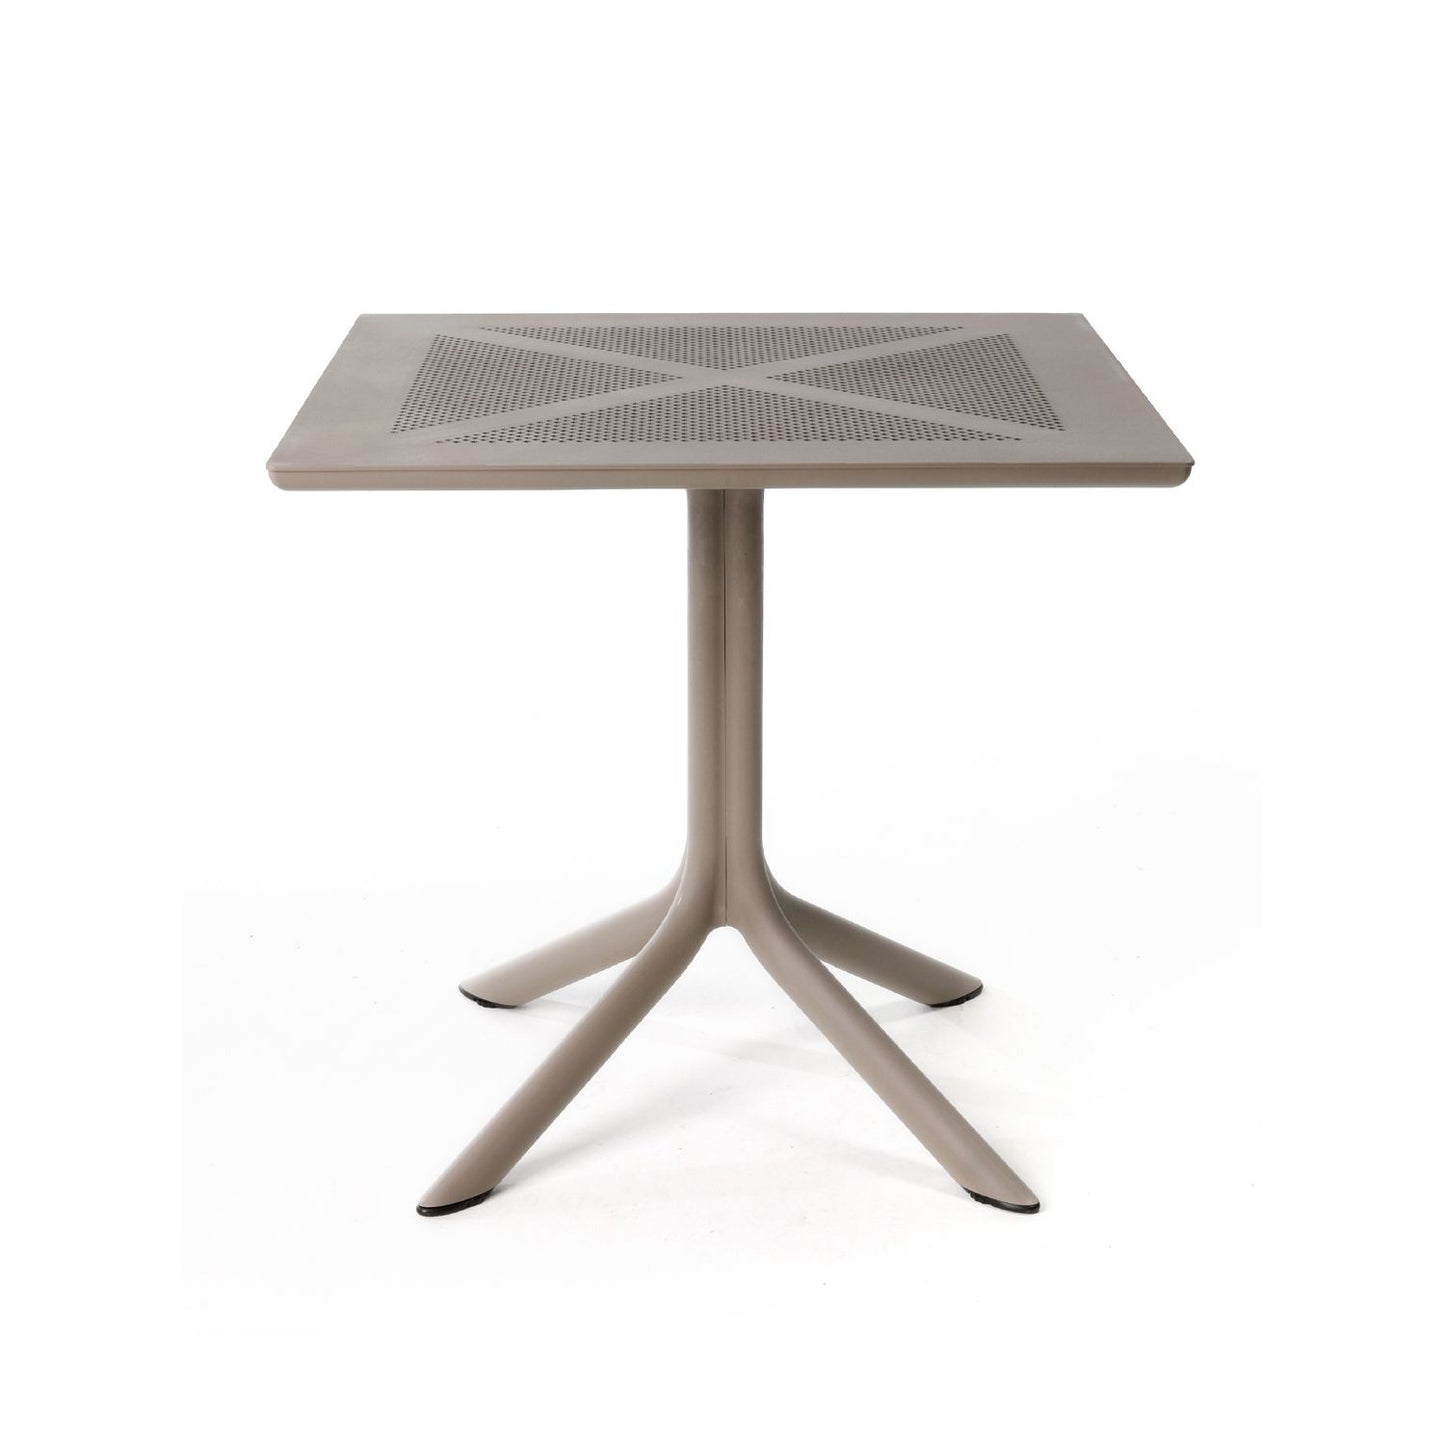 Clipx 80cm Garden Table By Nardi - Taupe